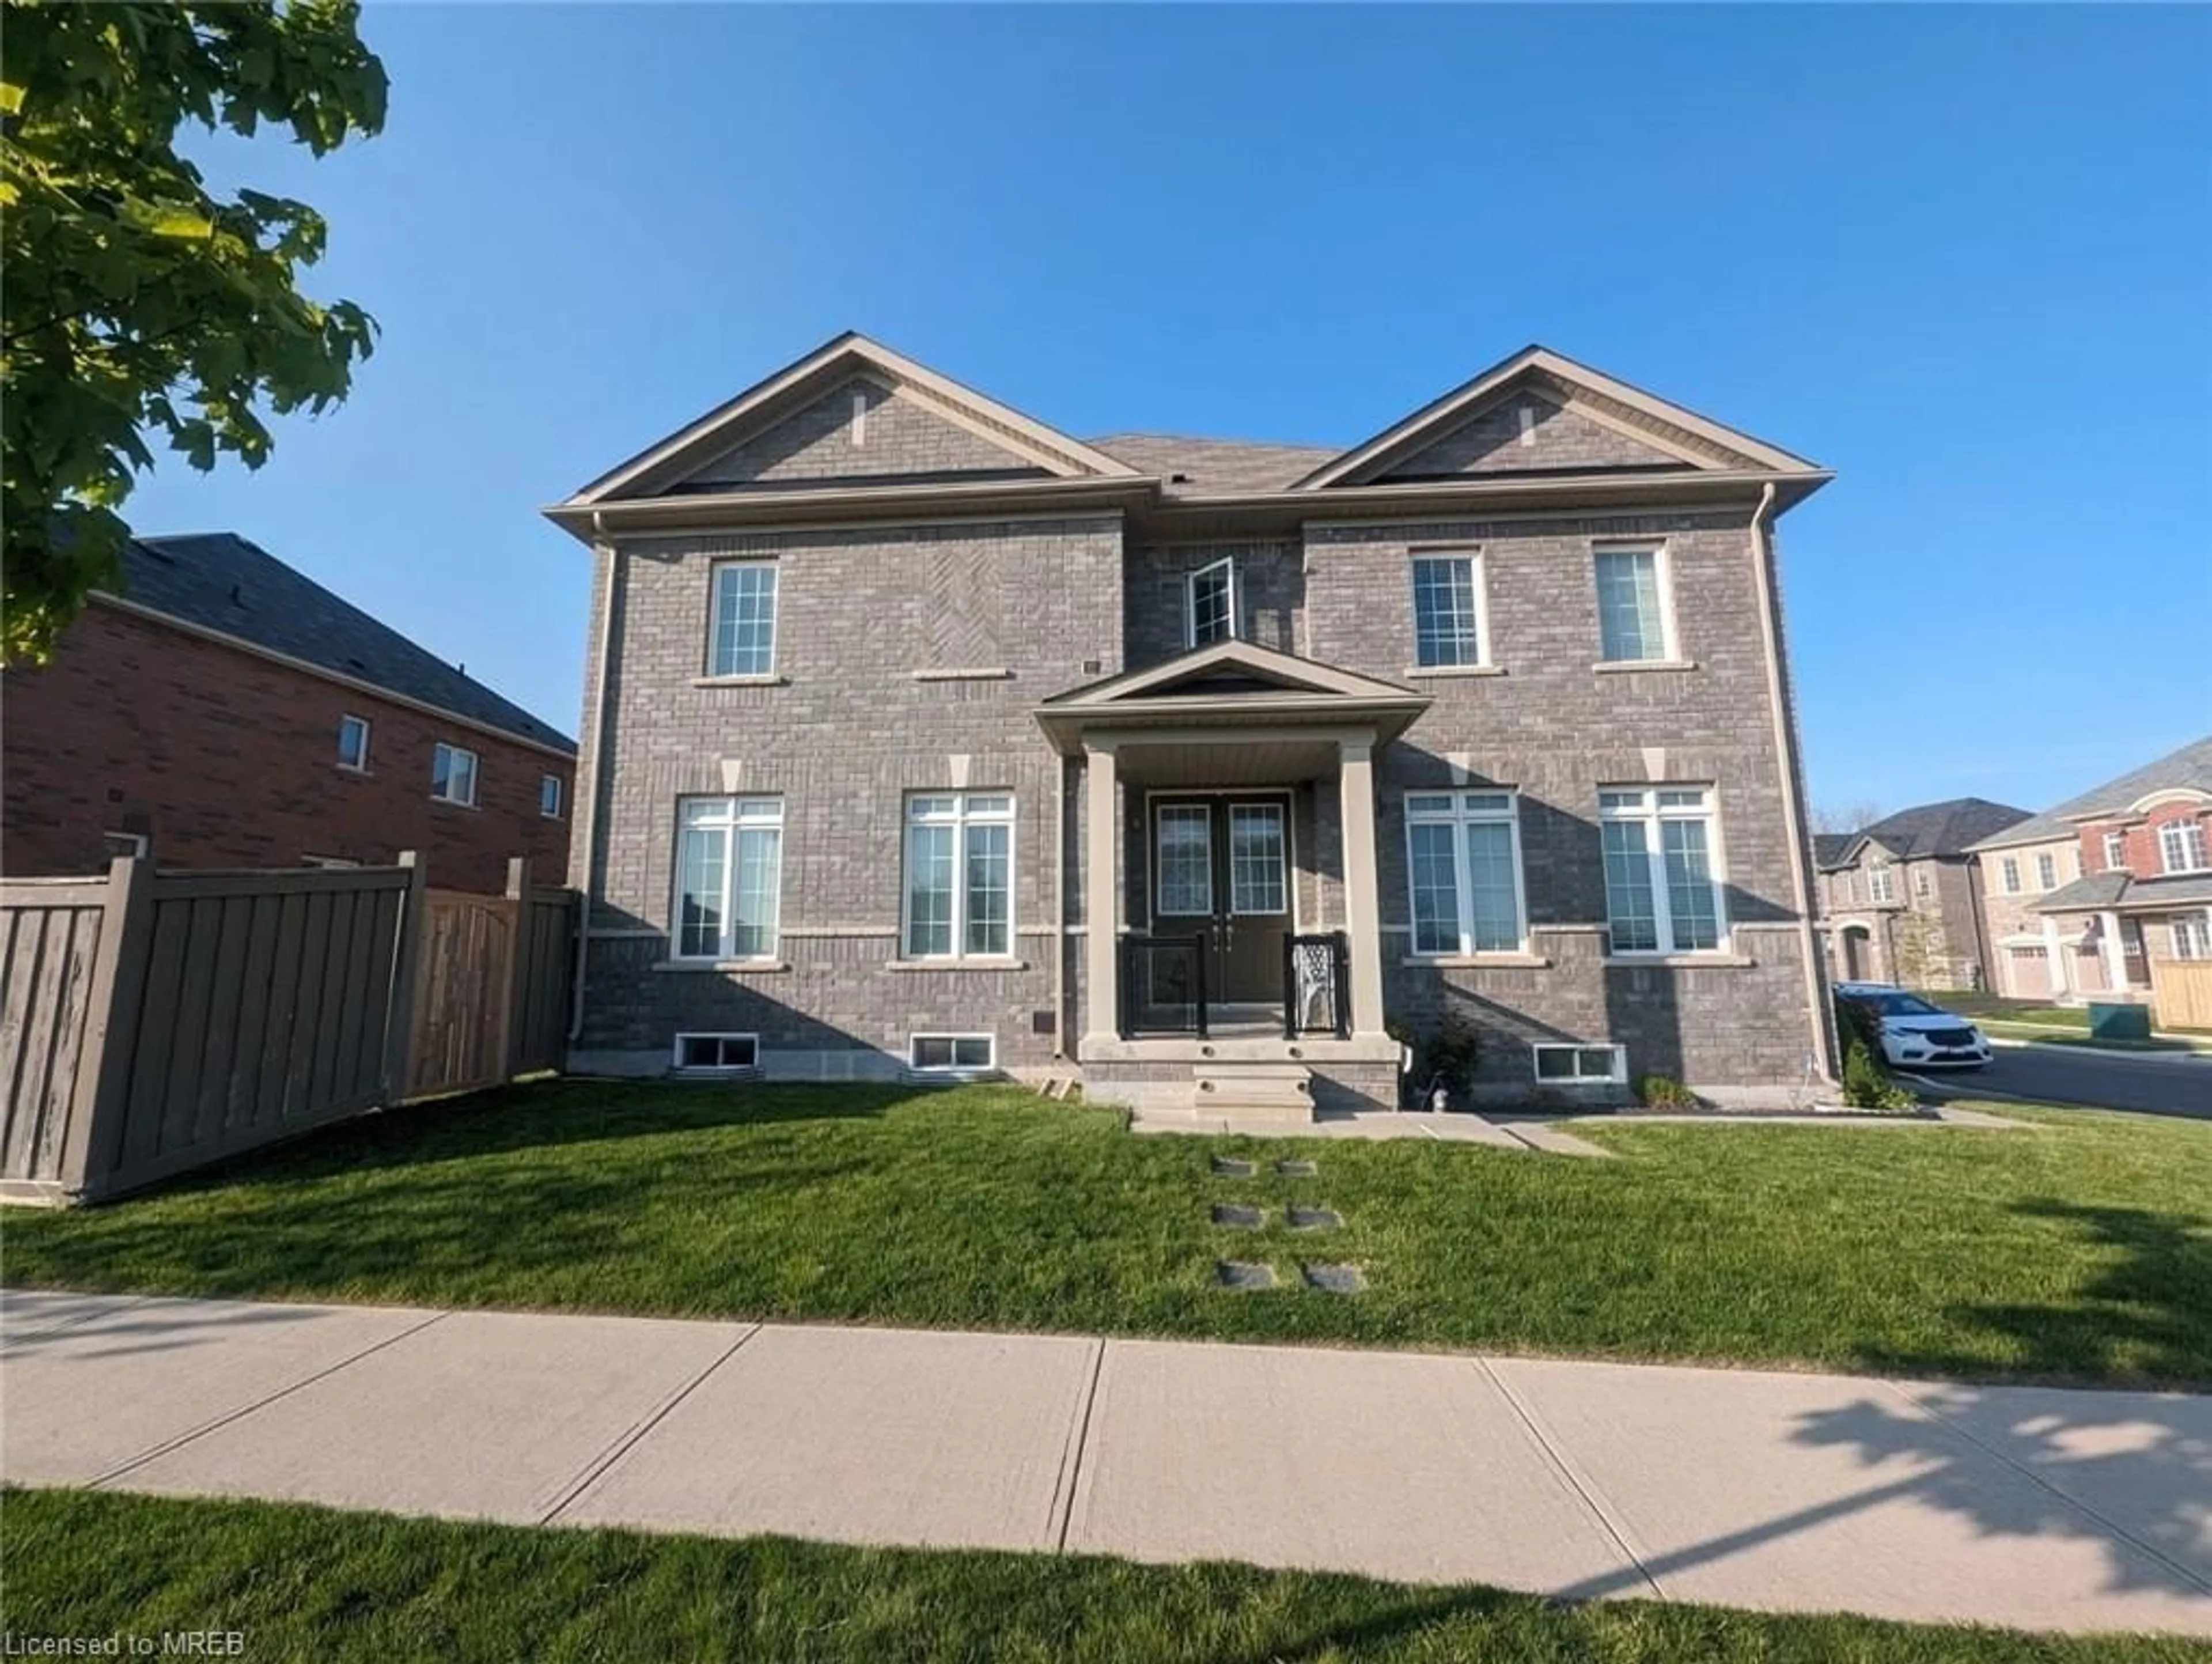 Home with brick exterior material for 351 Royal West Drive Dr, Brampton Ontario L6X 5J6